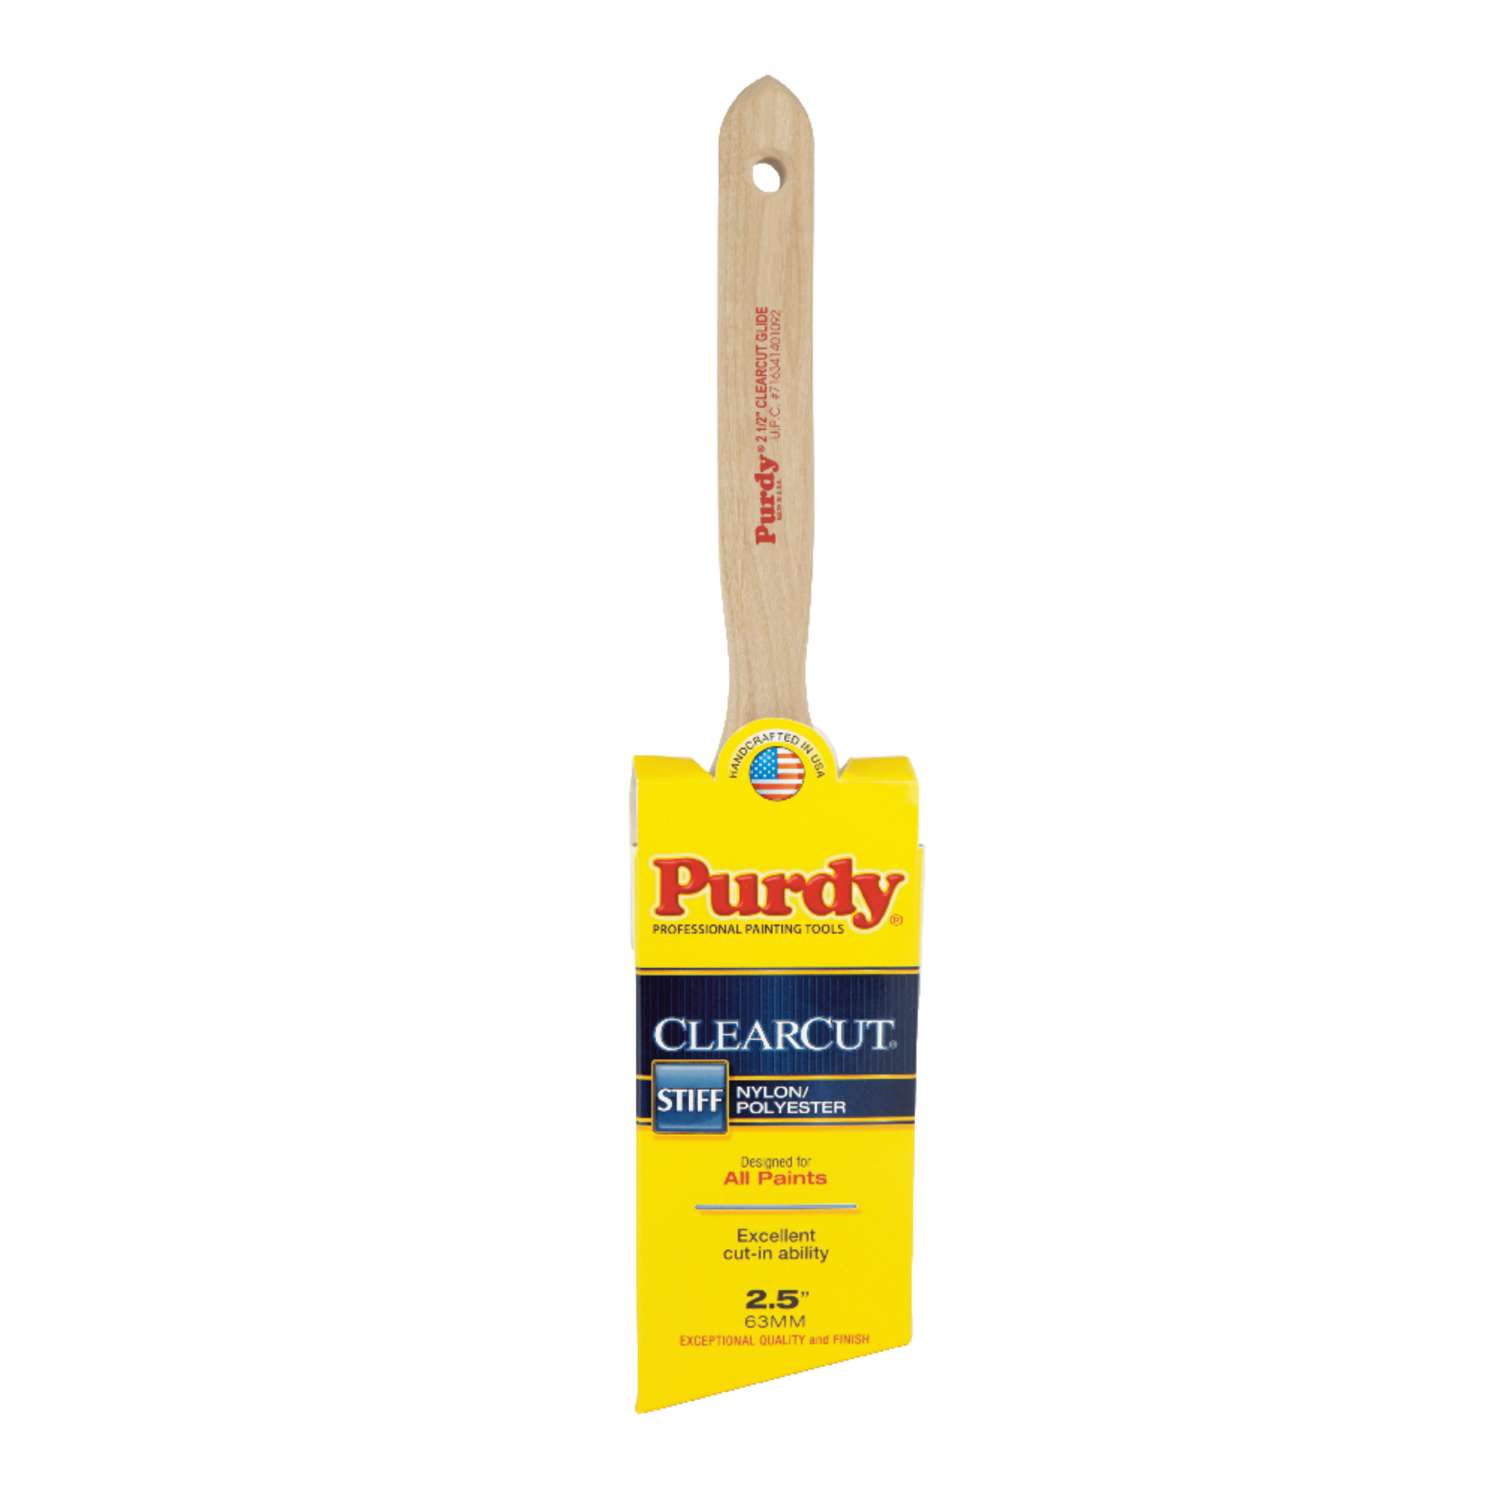 Purdy Clearcut Glide 2 12 In W Angle Trim Paint Brush Ace Hardware